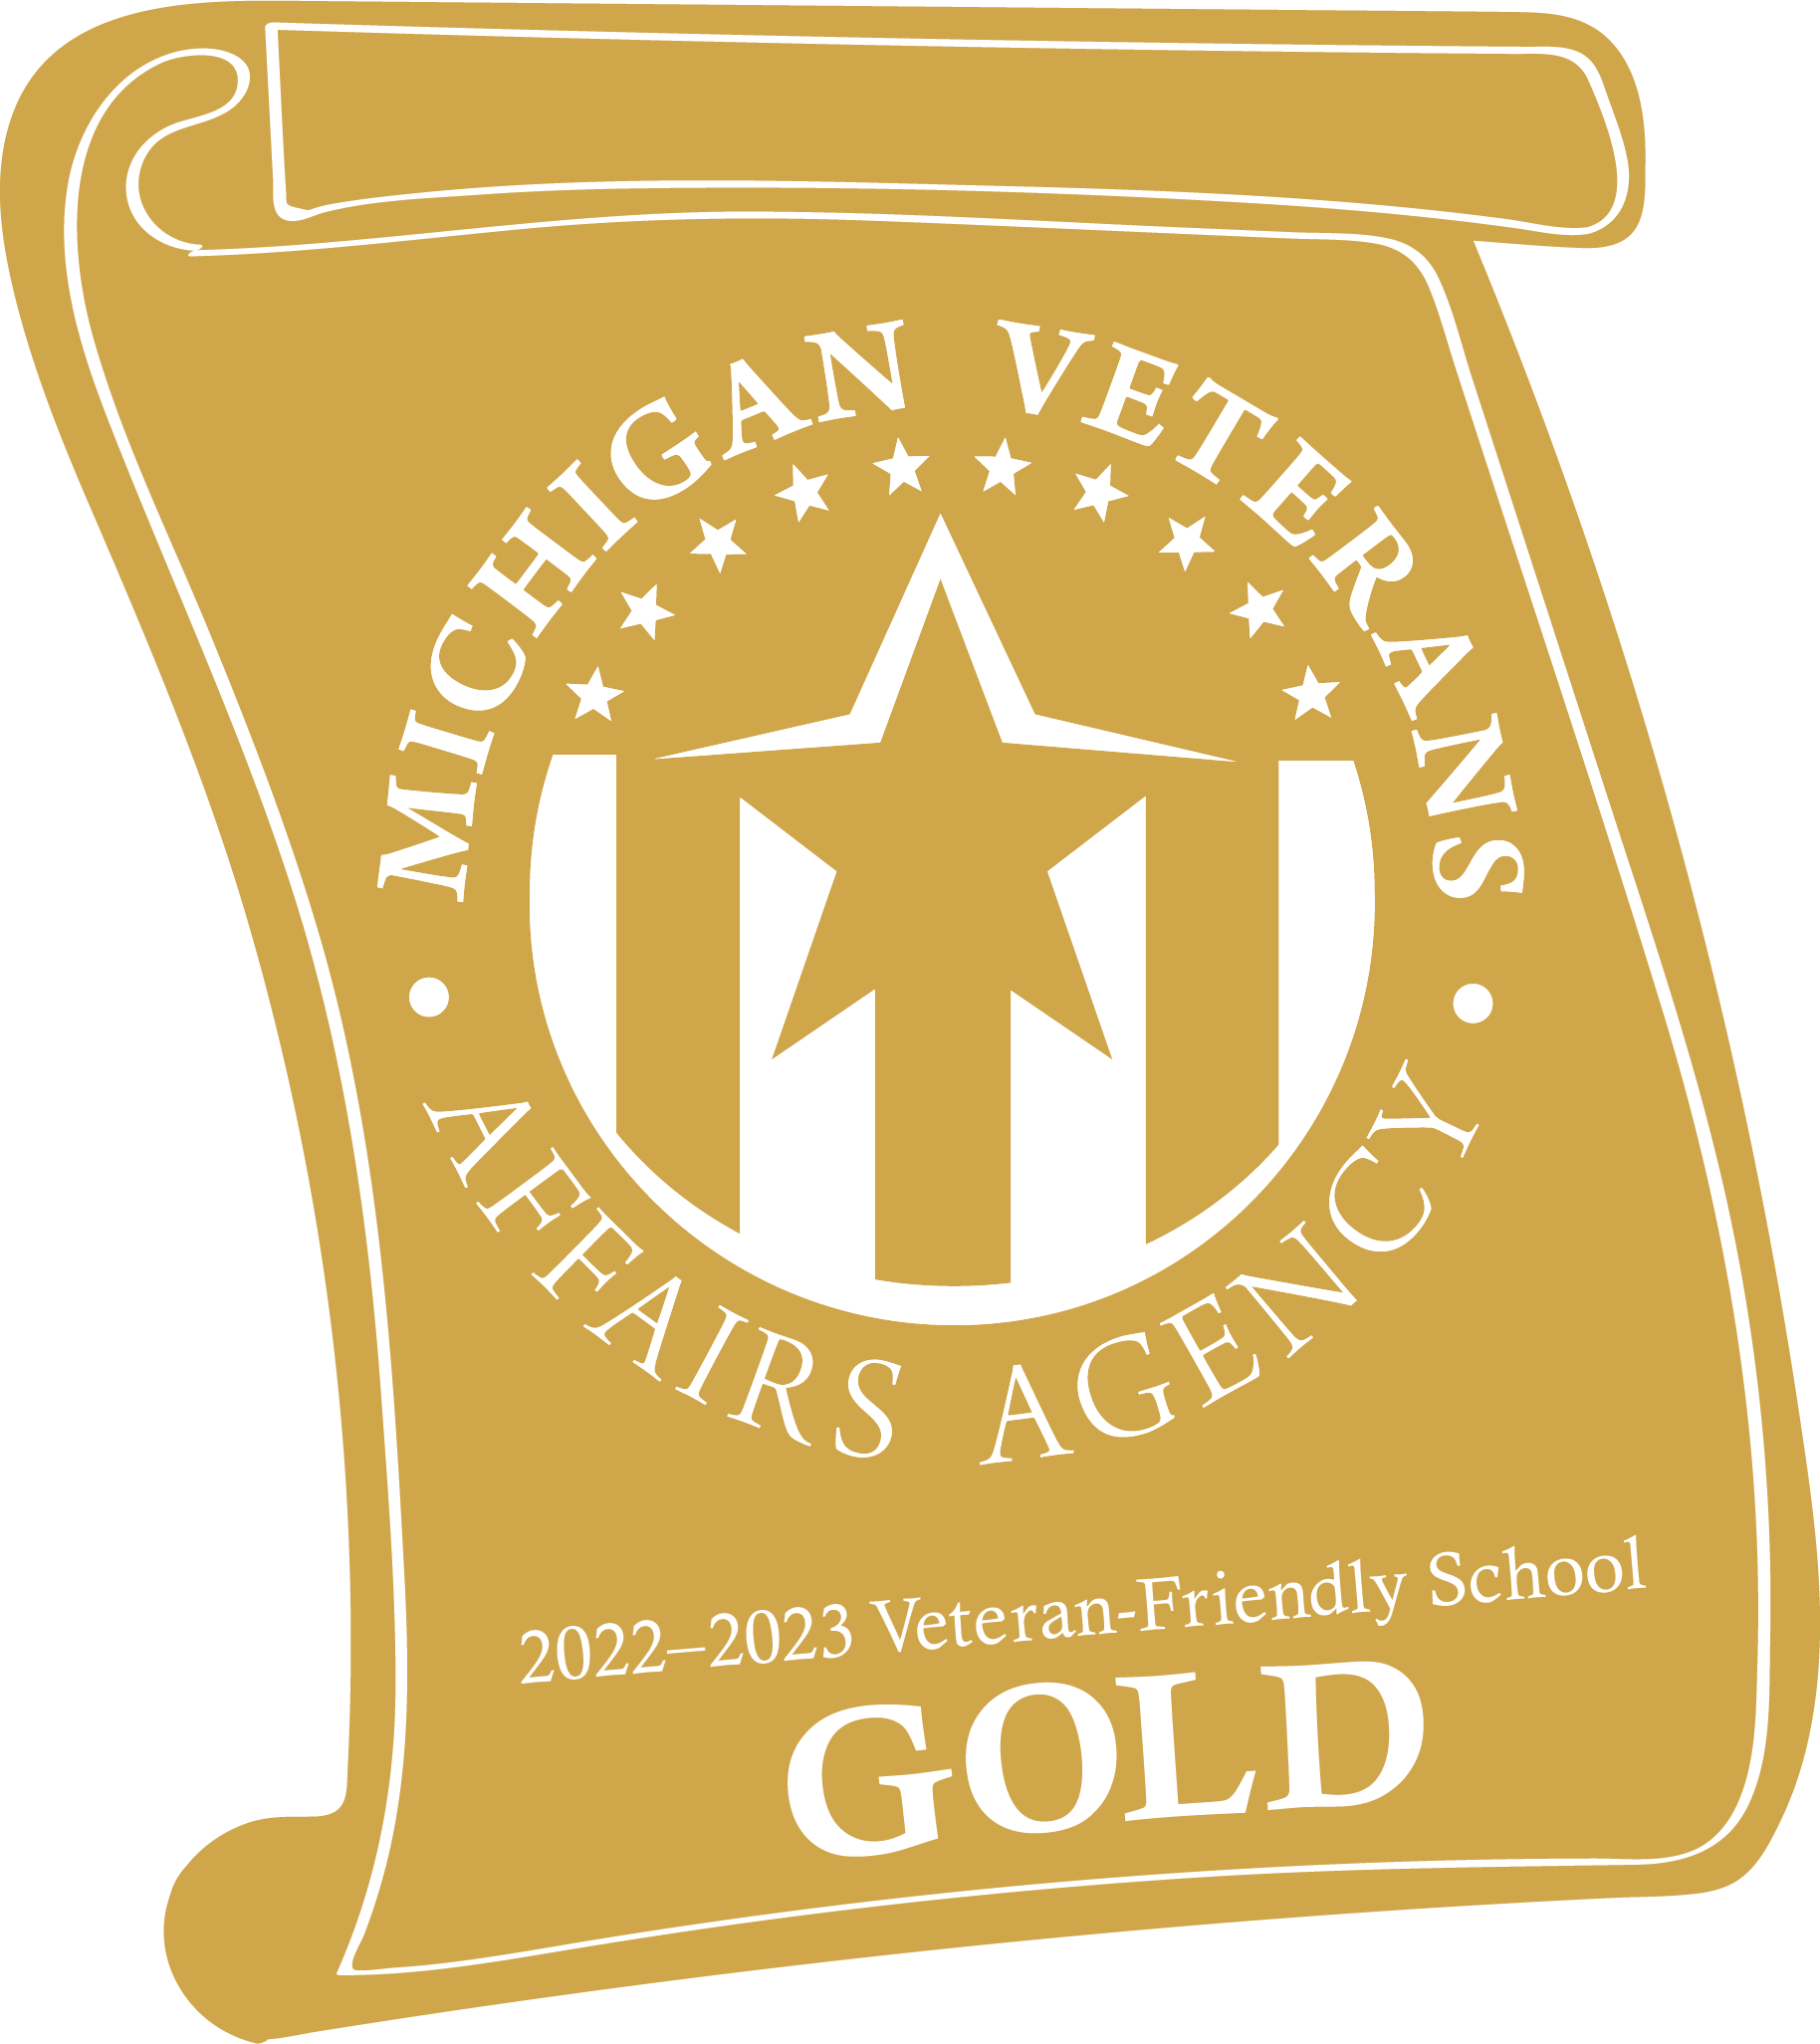 A graphic of a gold letter reads Michigan Veteran Affairs Agency 2022-2023 Veteran-Friendly School GOLD